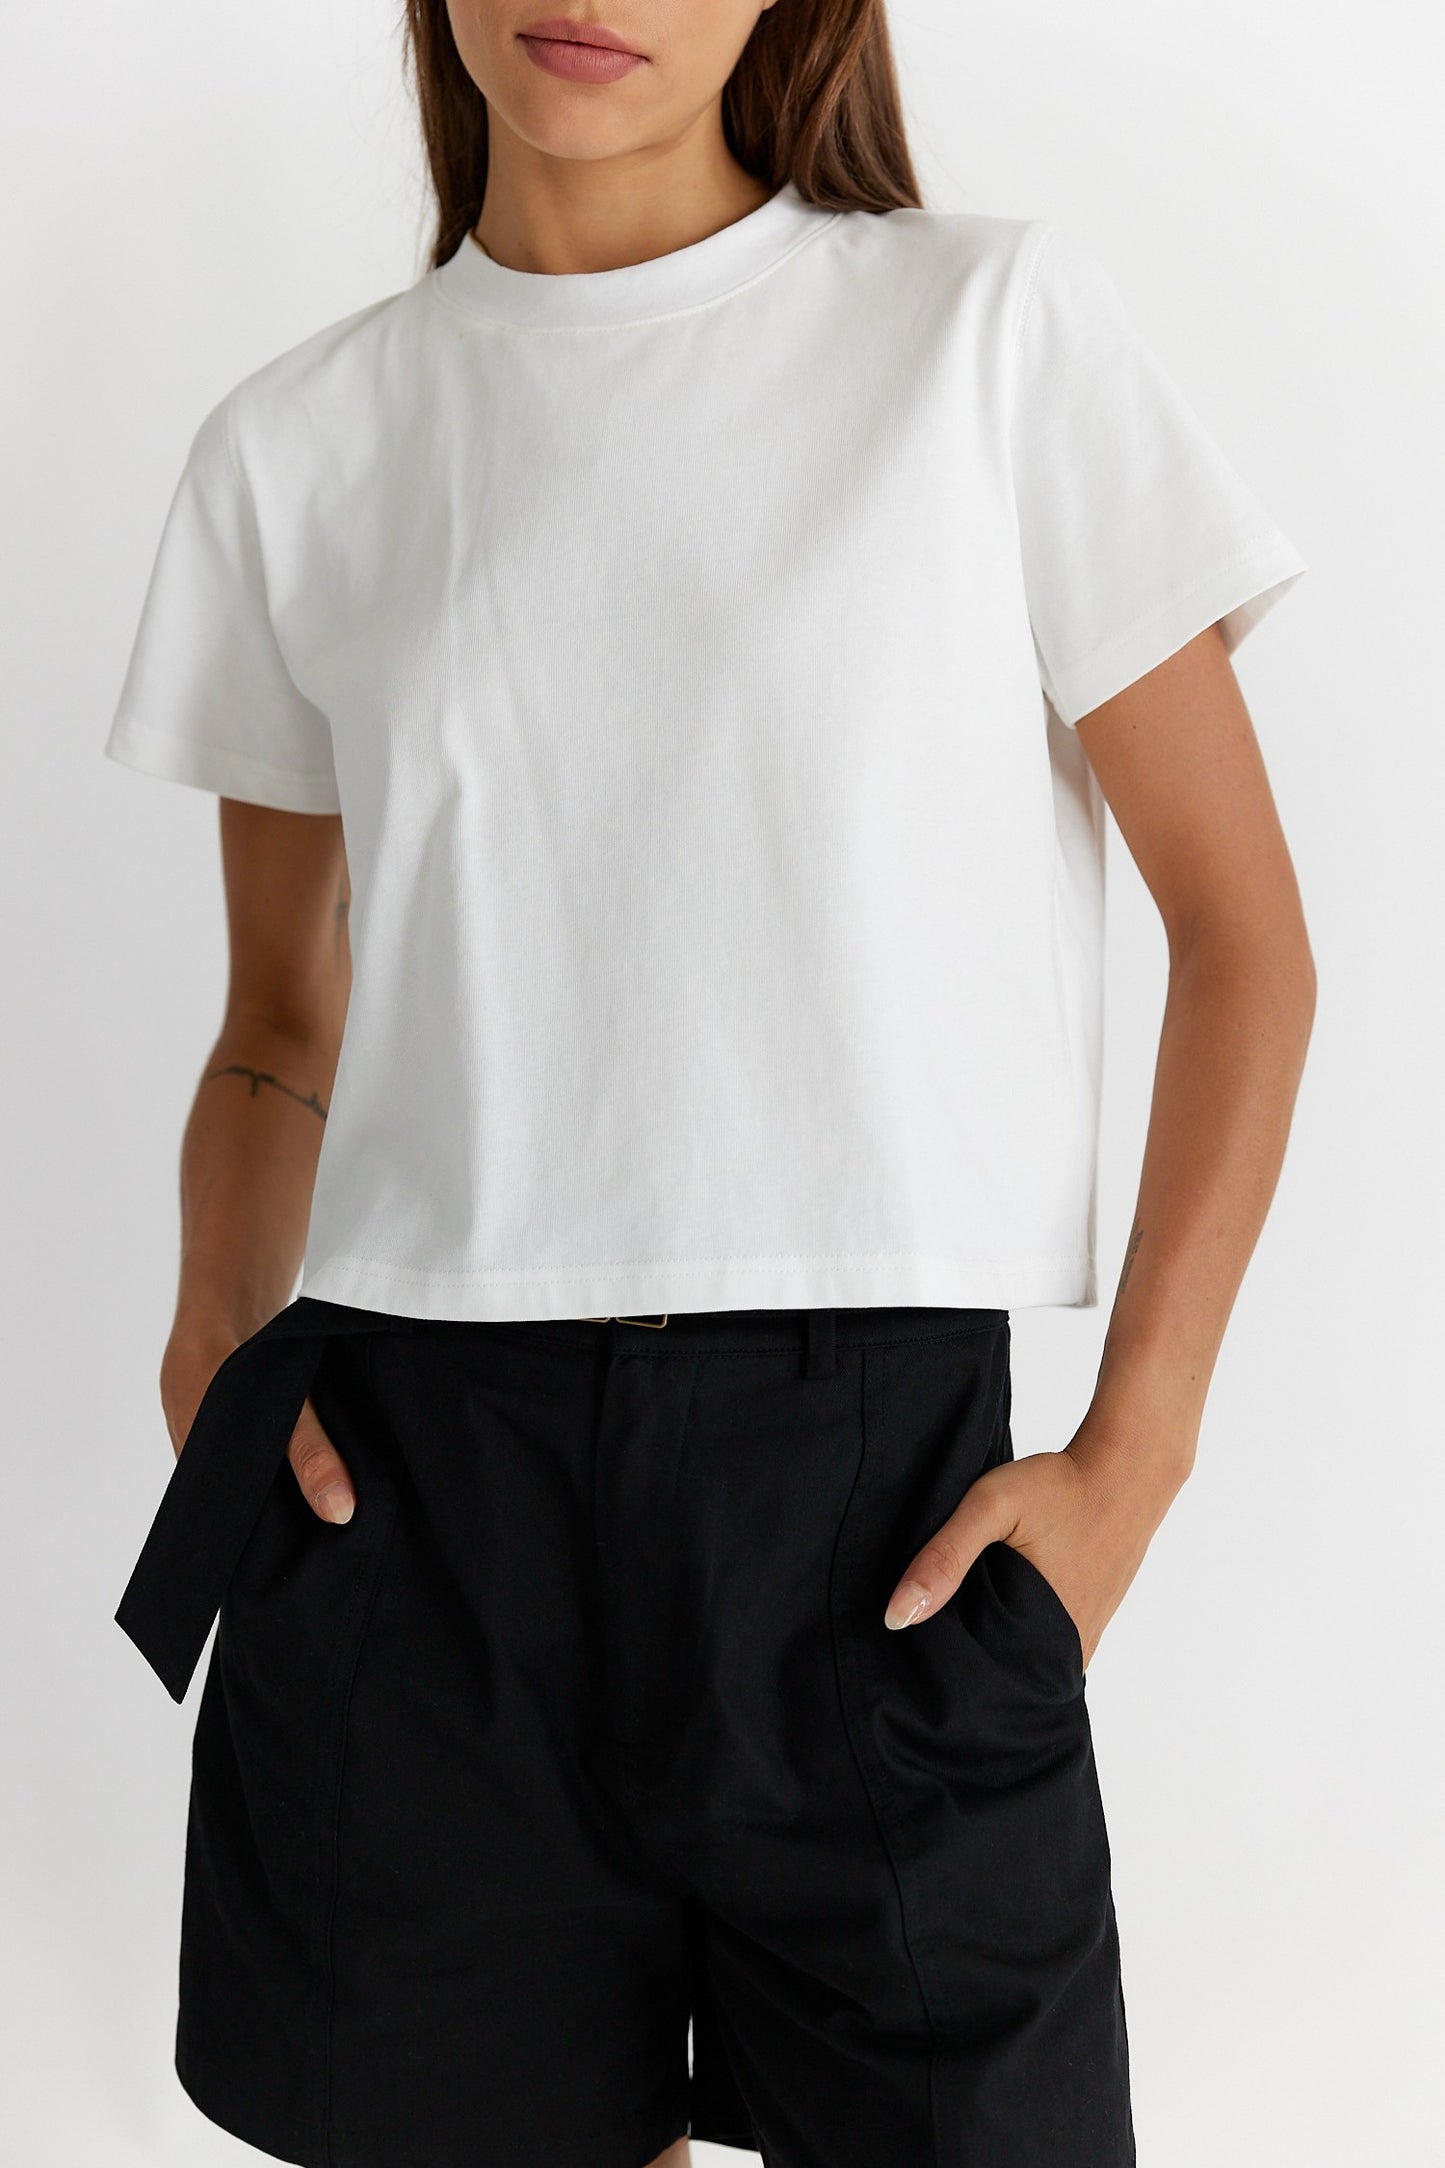 The Lanie Tee in White